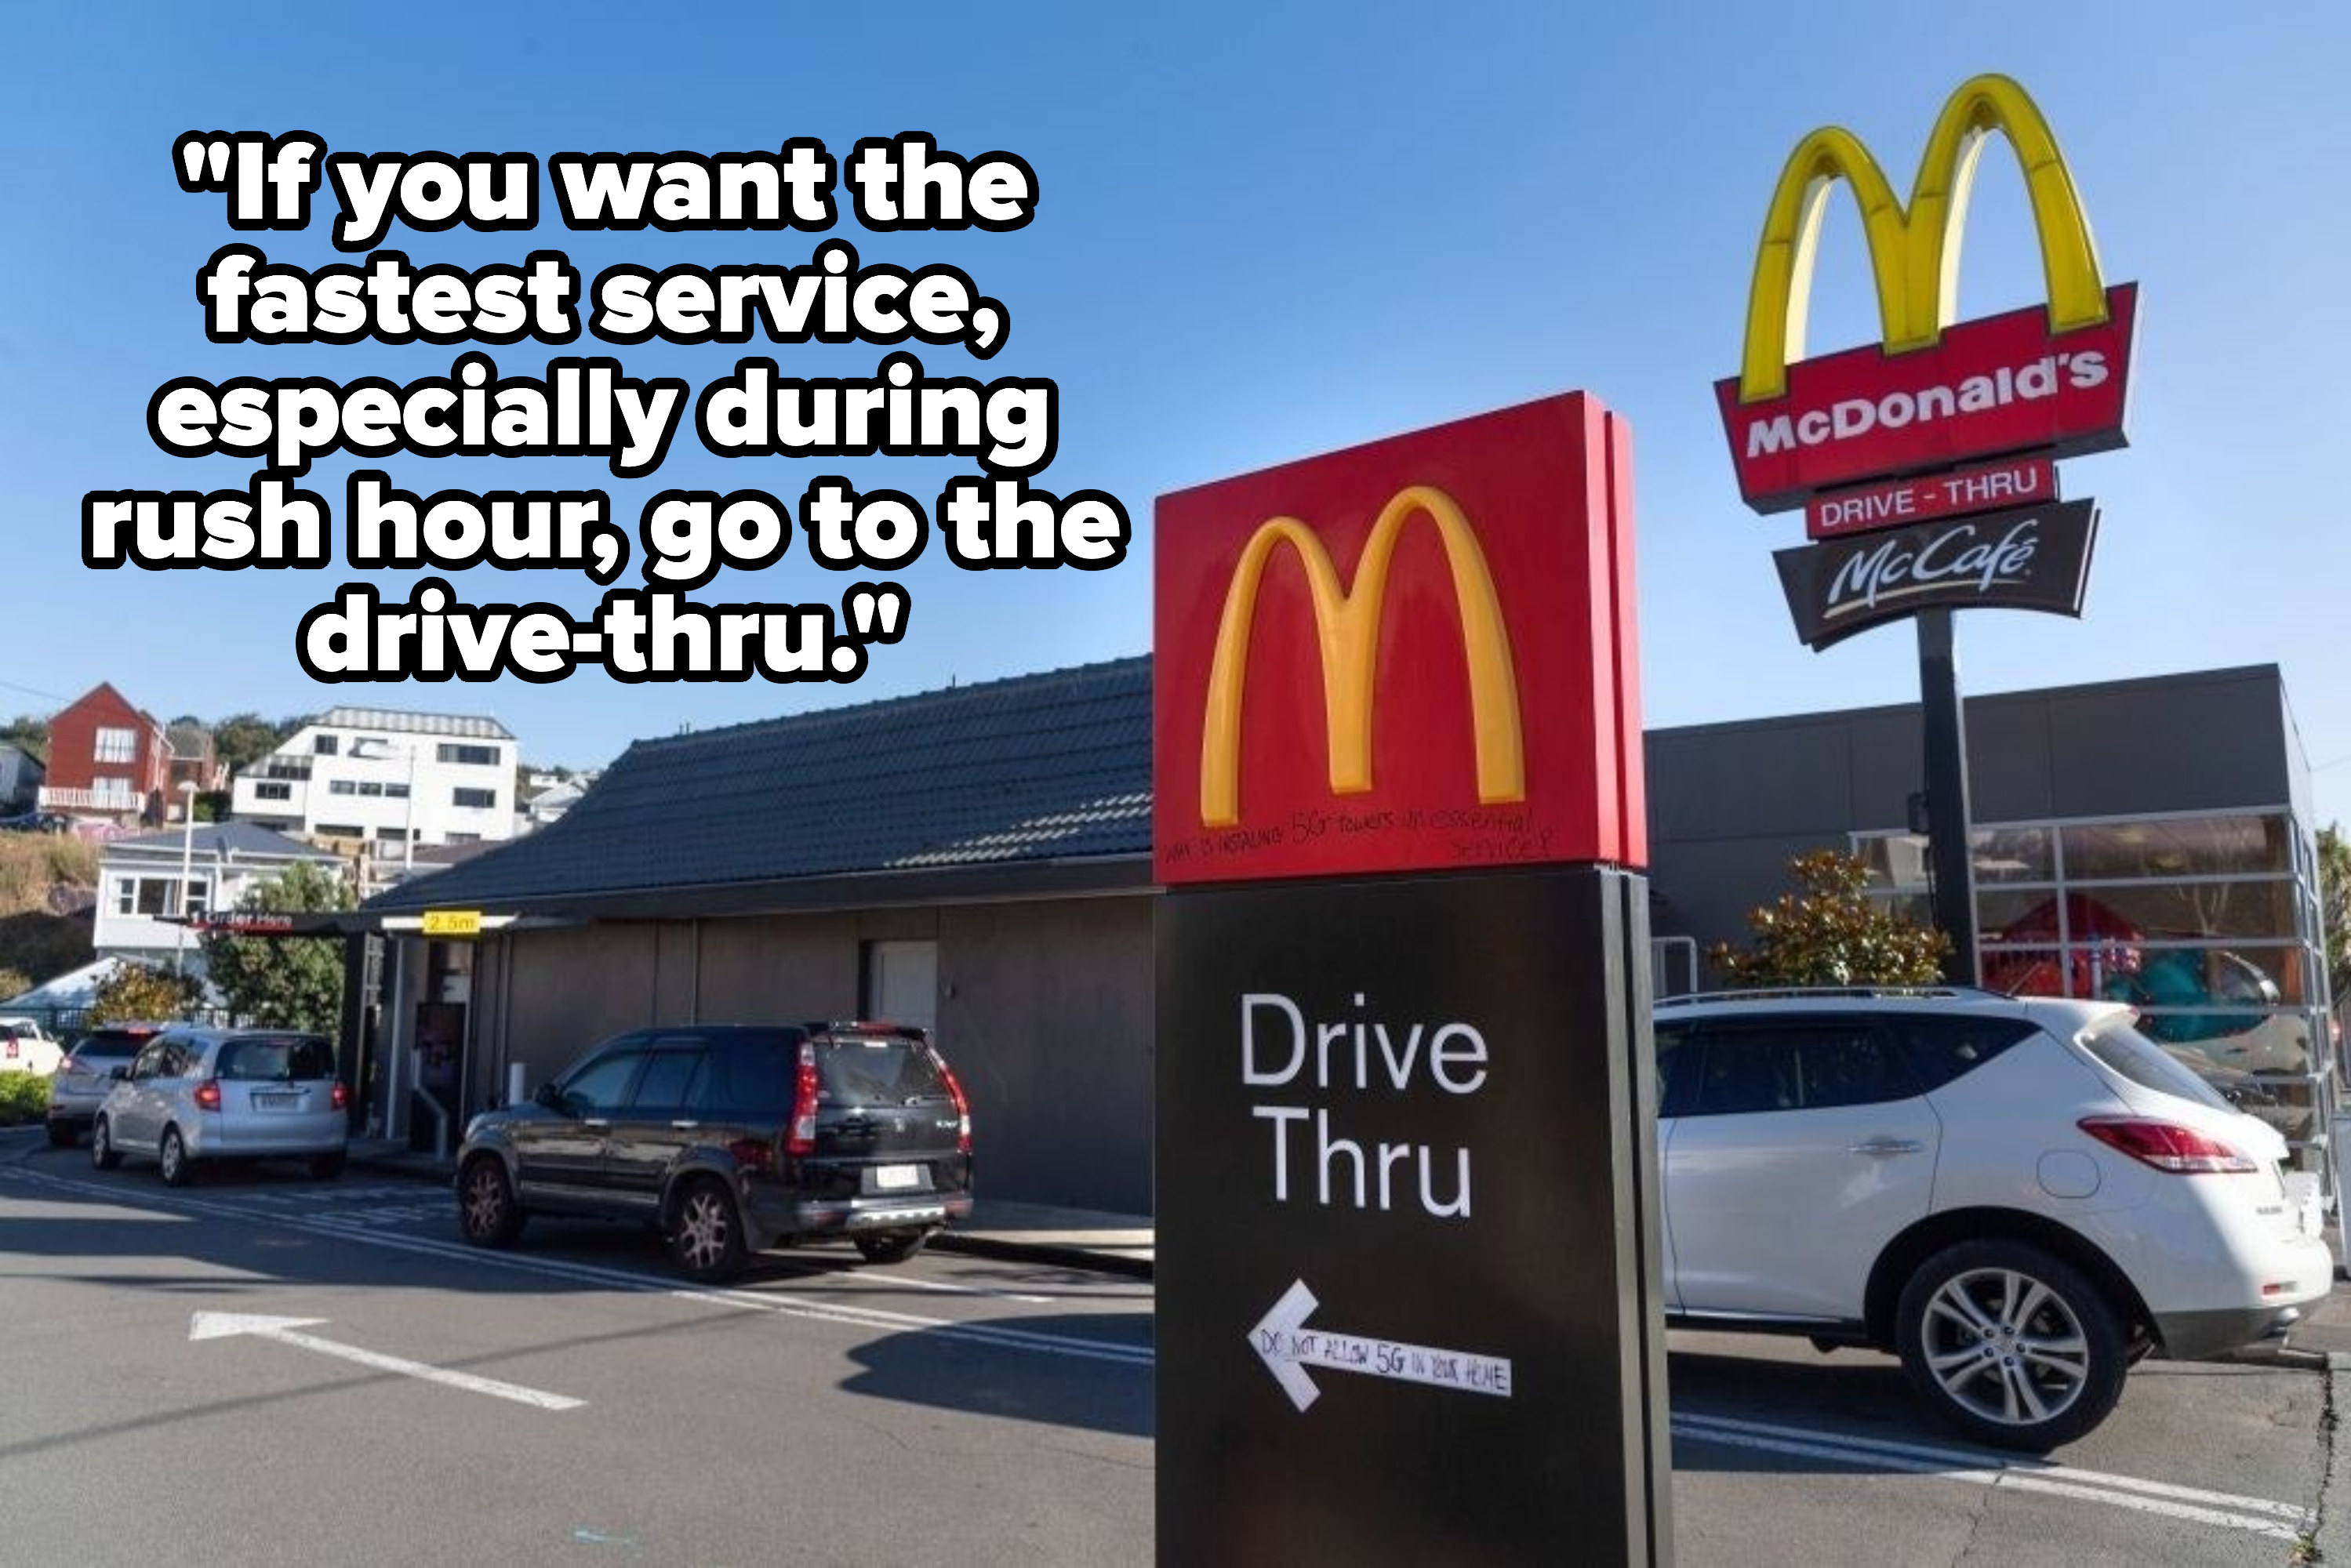 &quot;If you want the fastest service, especially during rush hour, go to the drive-thru&quot; over a mcdonalds drive-thru